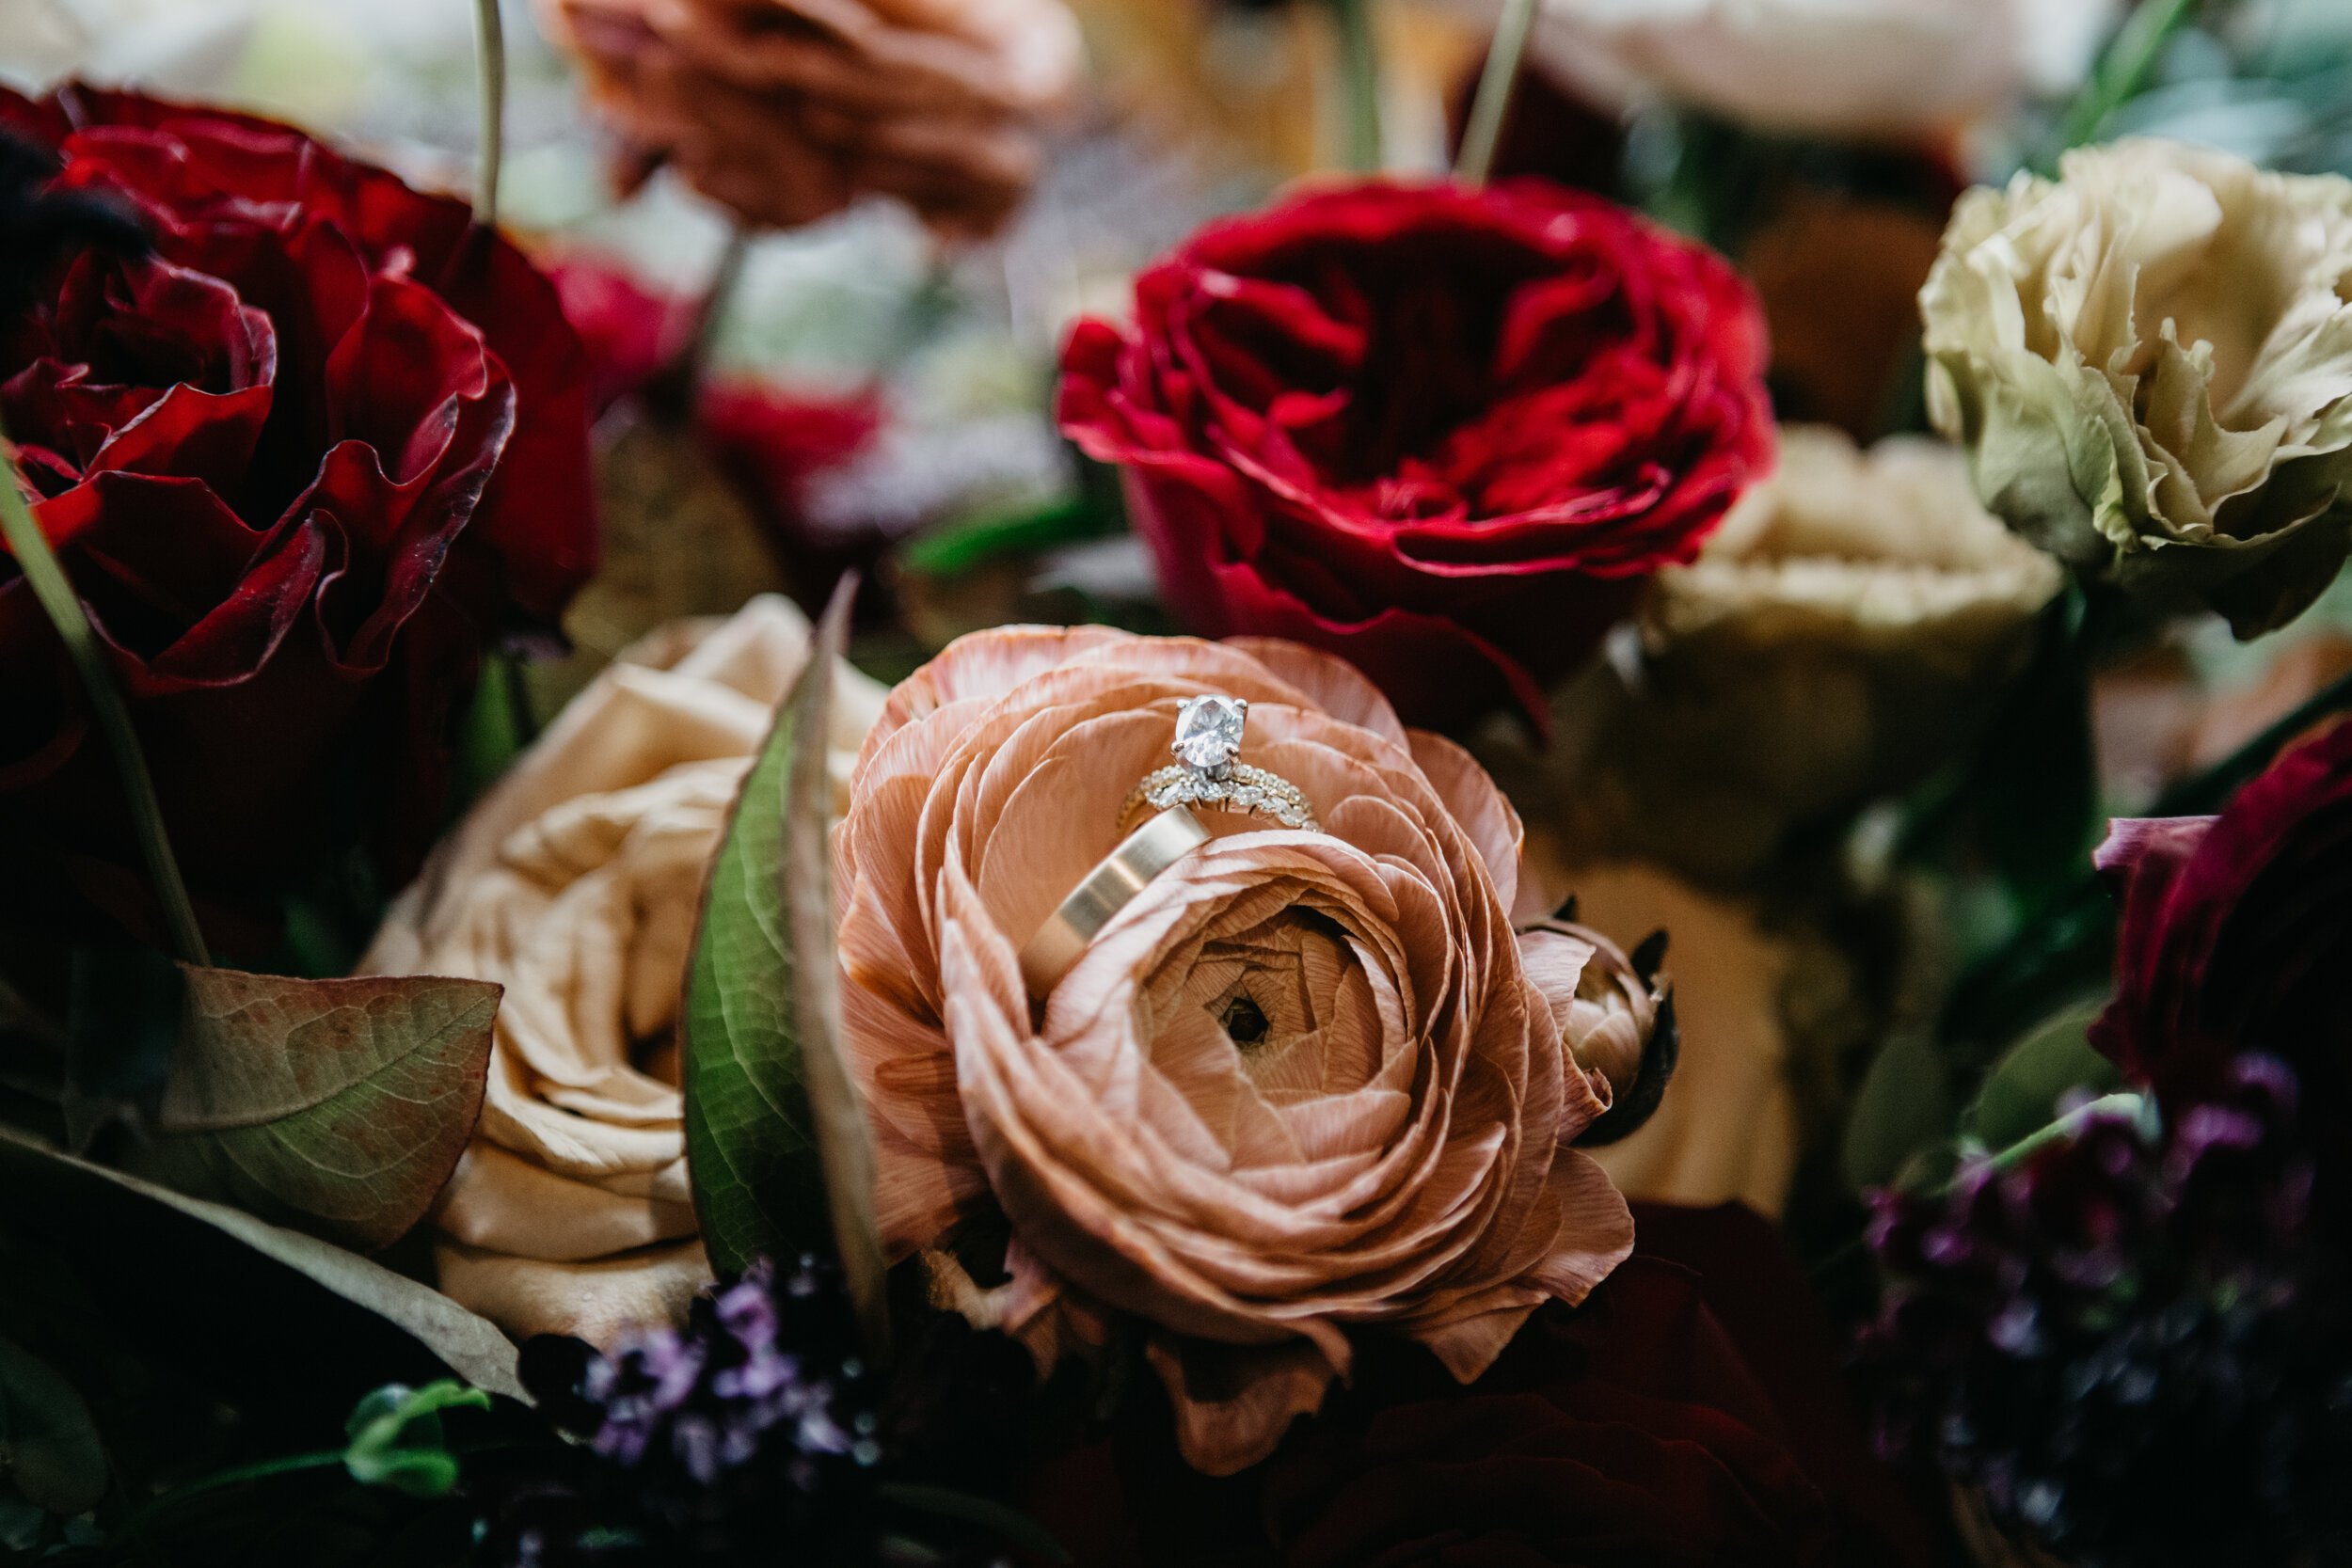 Lush, asymmetrical bridal bouquet with rich fall color palette of deep plum, eggplant, copper, and rusty orange with garden roses, ranunculus, and greenery. Nashville wedding floral designer, Rosemary & Finch, at Clementine.